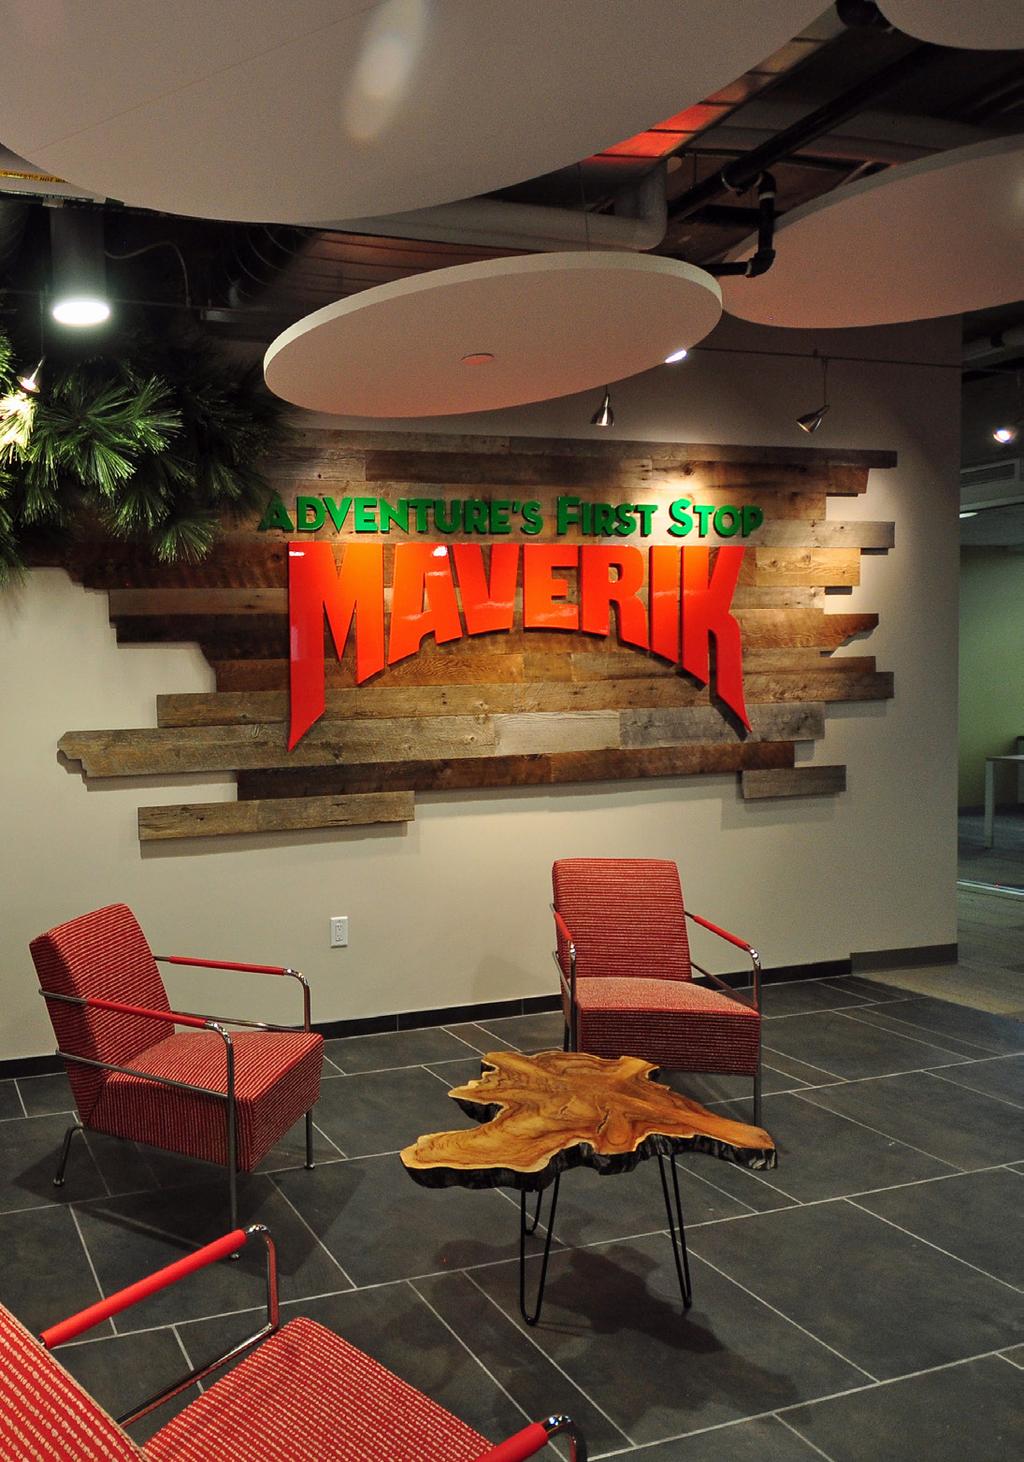 VISITORS KNOW THE SECOND THEY WALK IN THE LOBBY THAT MAVERIK IS ADVENTURE S FIRST STOP With this spirit in mind, Maverik reached out to 2020 Exhibits to create a corporate